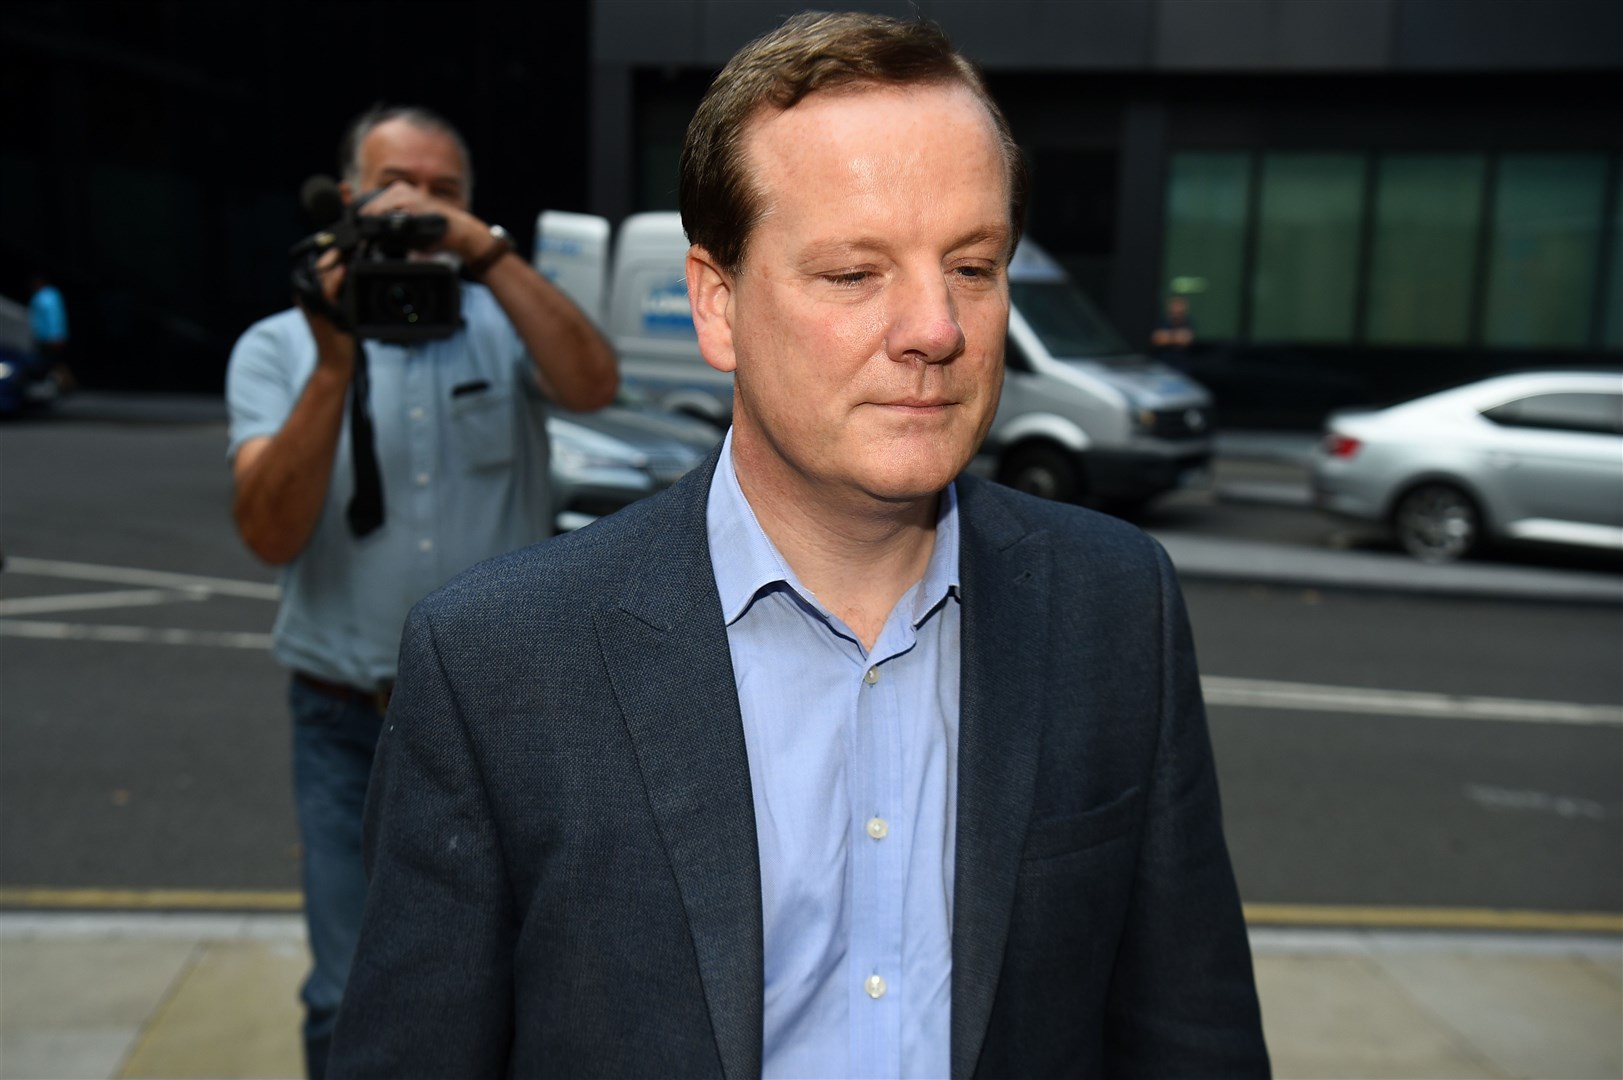 Charlie Elphicke arriving at Southwark Crown Court (Kirsty O’Connor/PA)